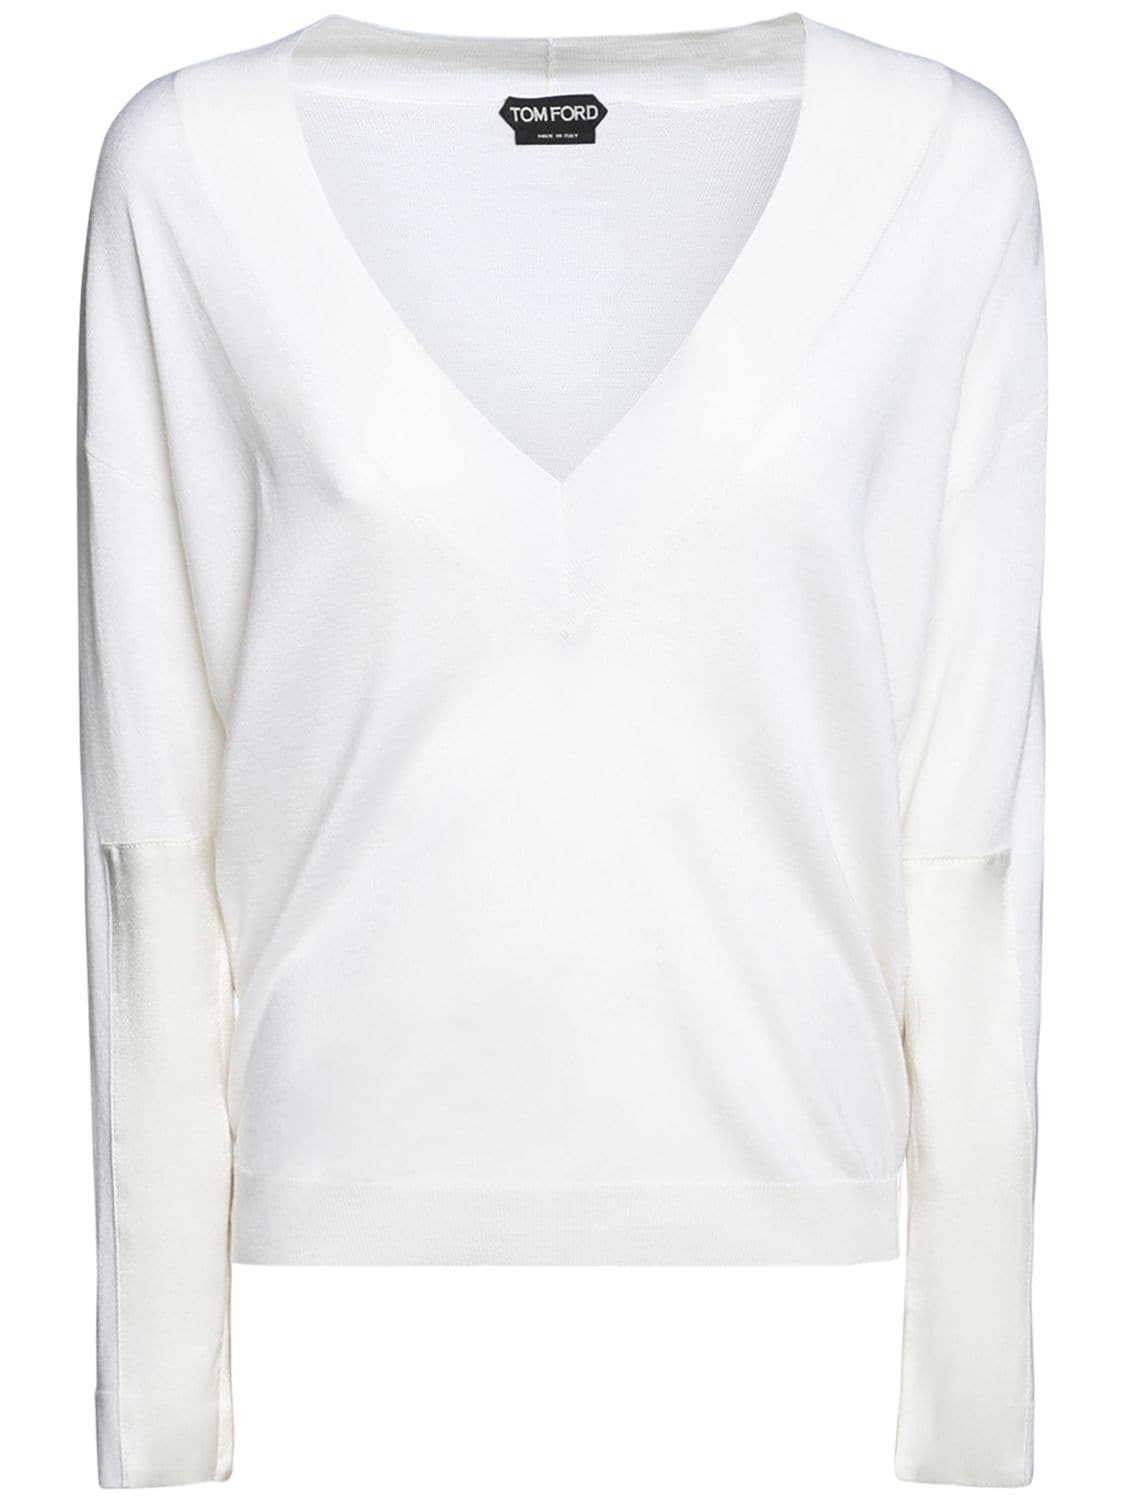 Womens Clothing Tops Long-sleeved tops Tom Ford Cashmere Knit Top W/ Satin Inserts in Black 